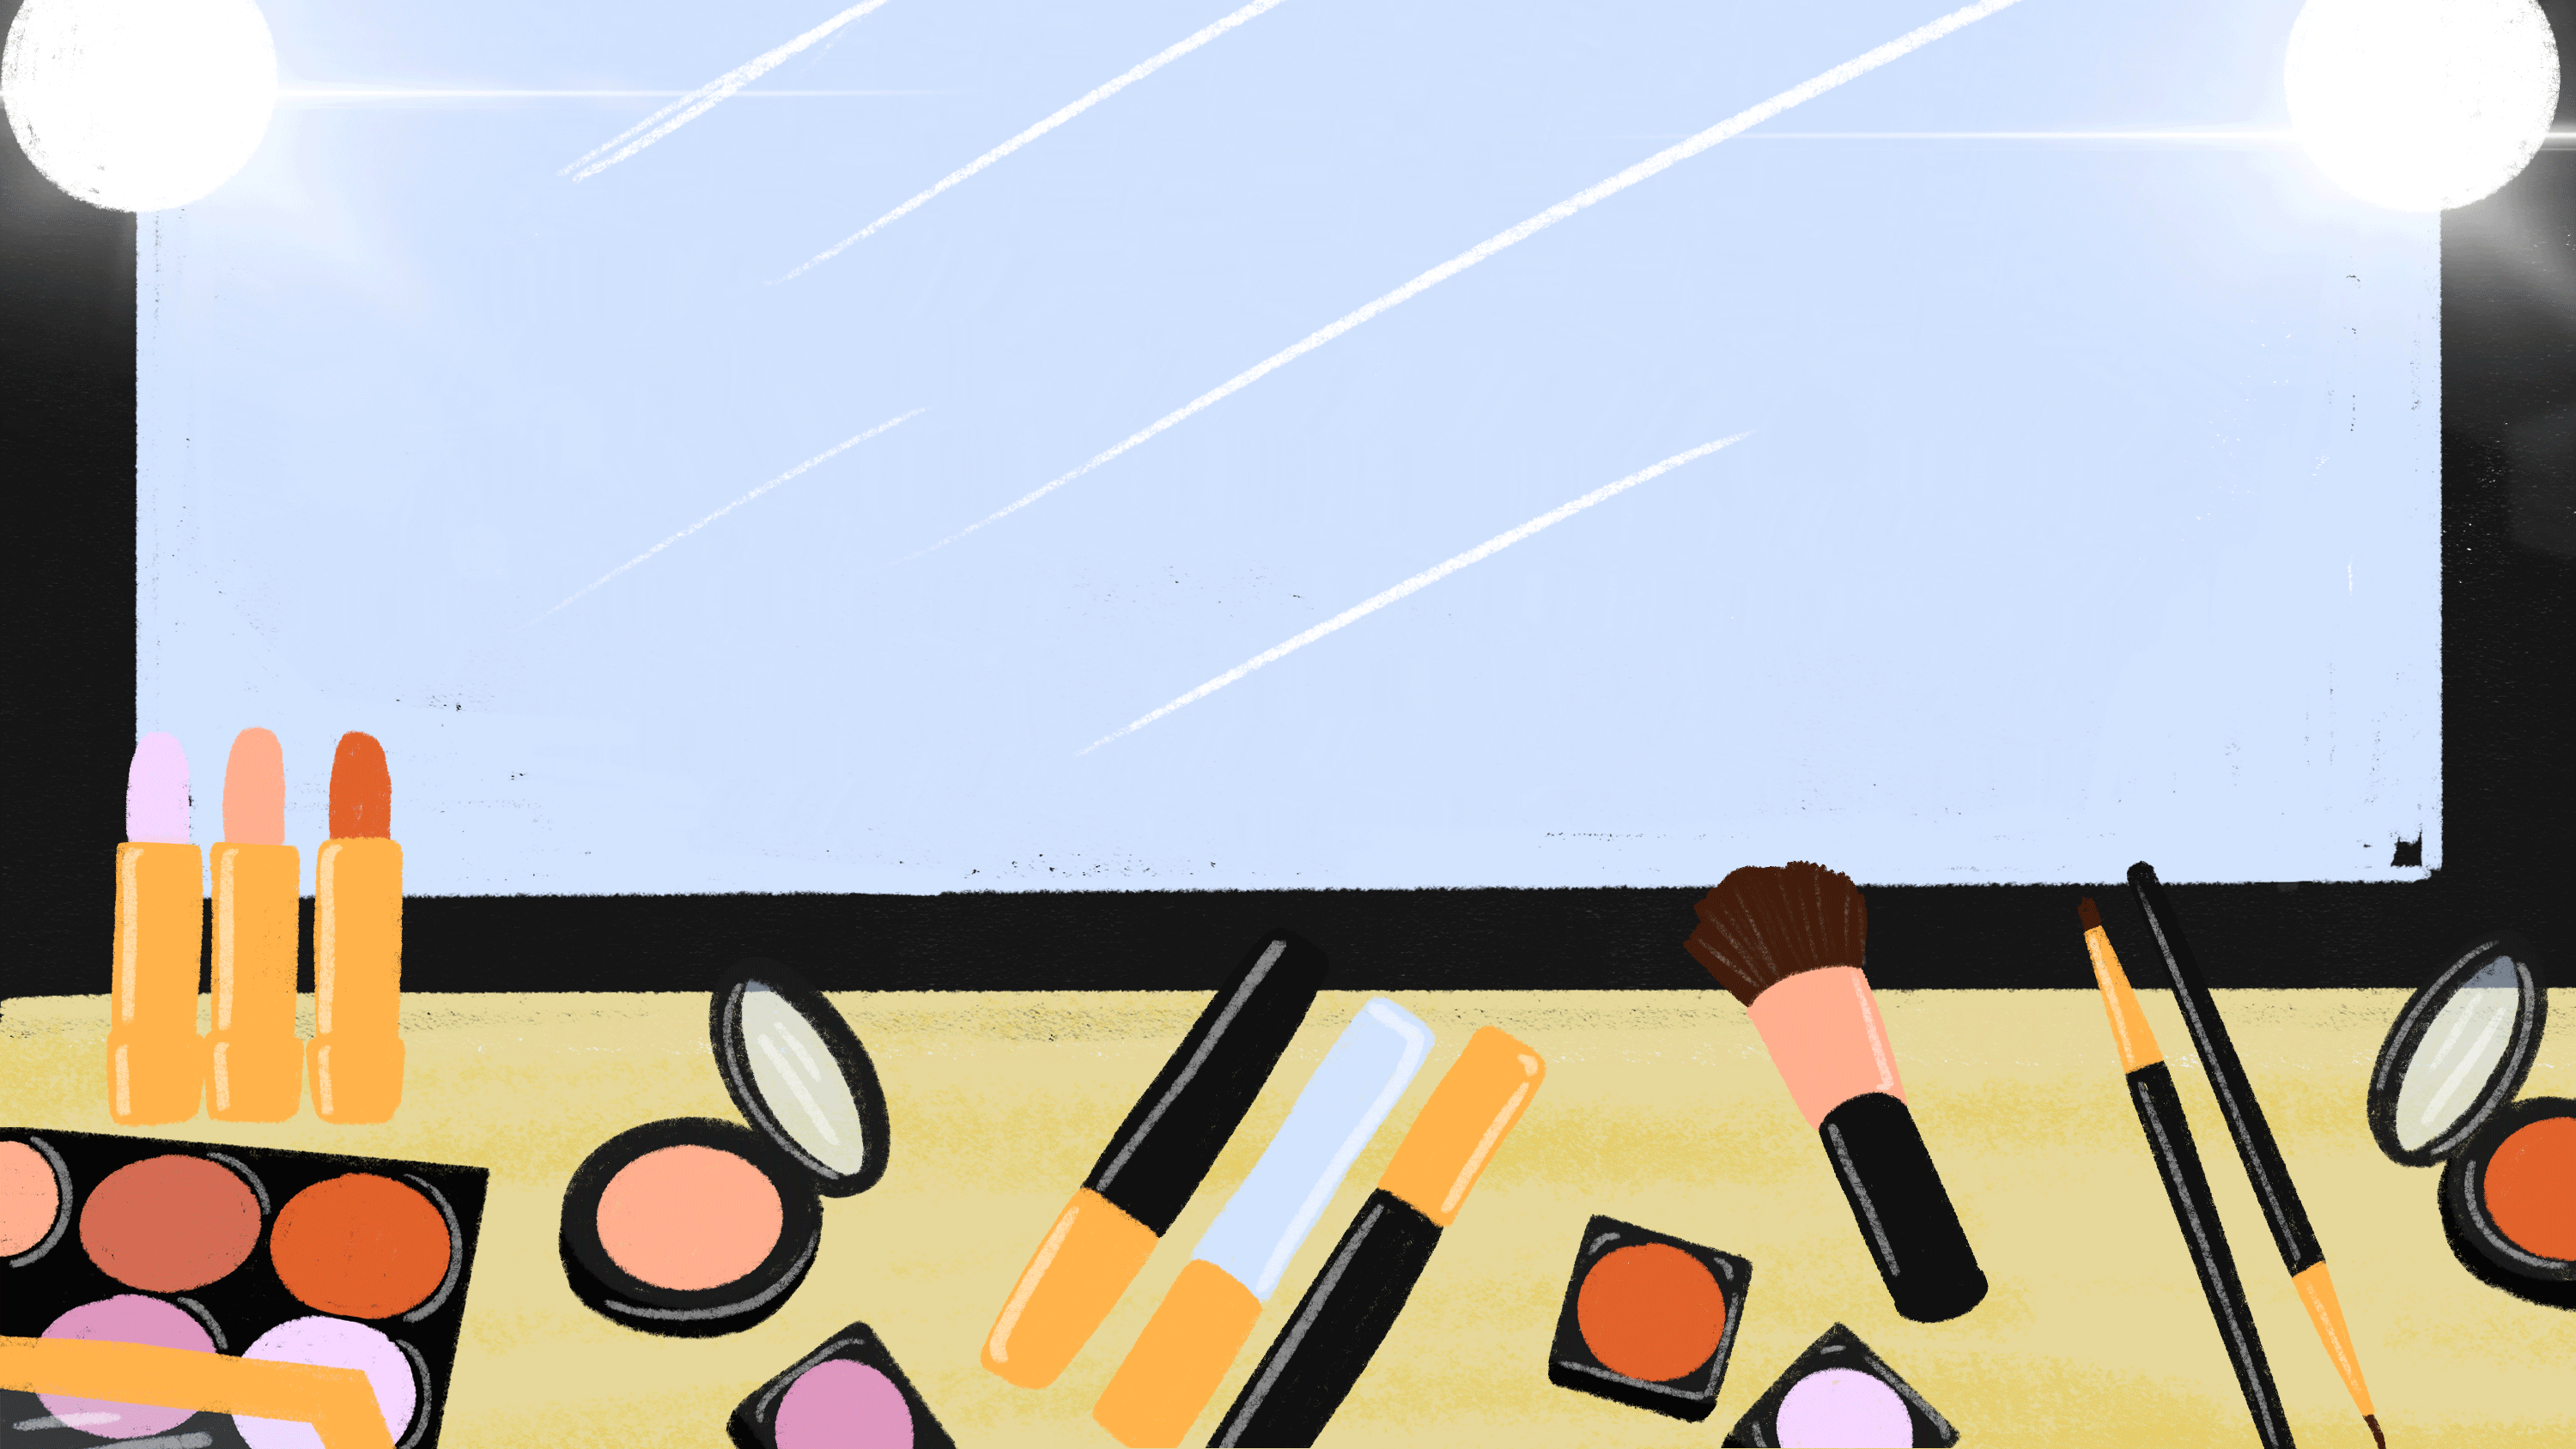 An illustration of makeup on a store counter with prices and arrows blinking above the objects.